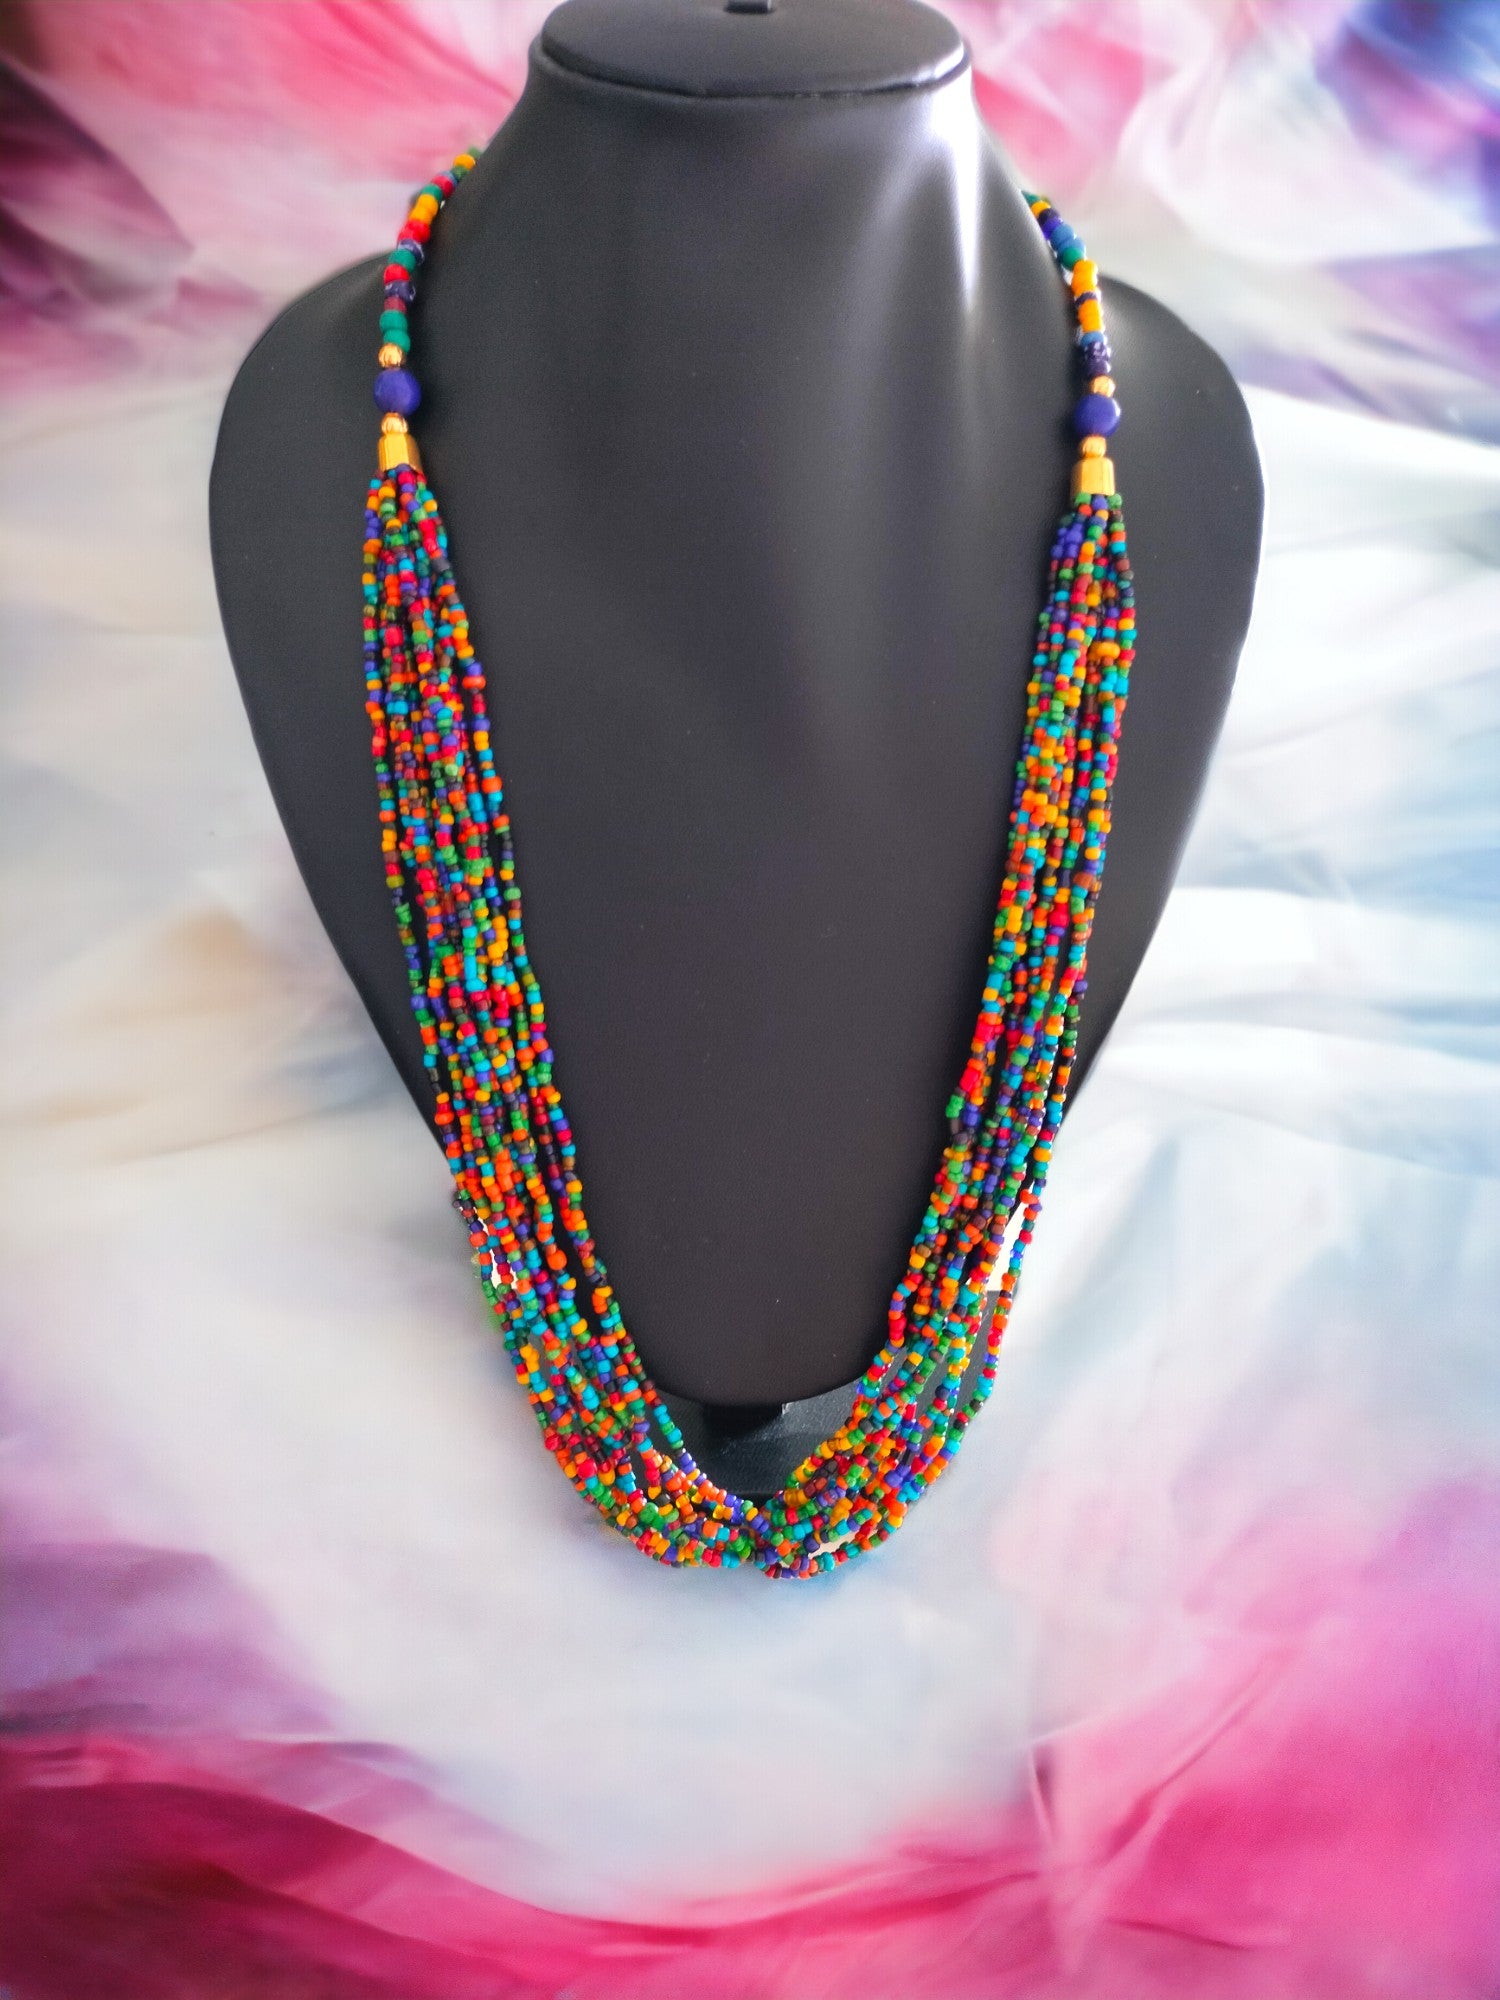 Colour Carnival: Handmade Multi-Layered Beaded Necklace(12 Layers)